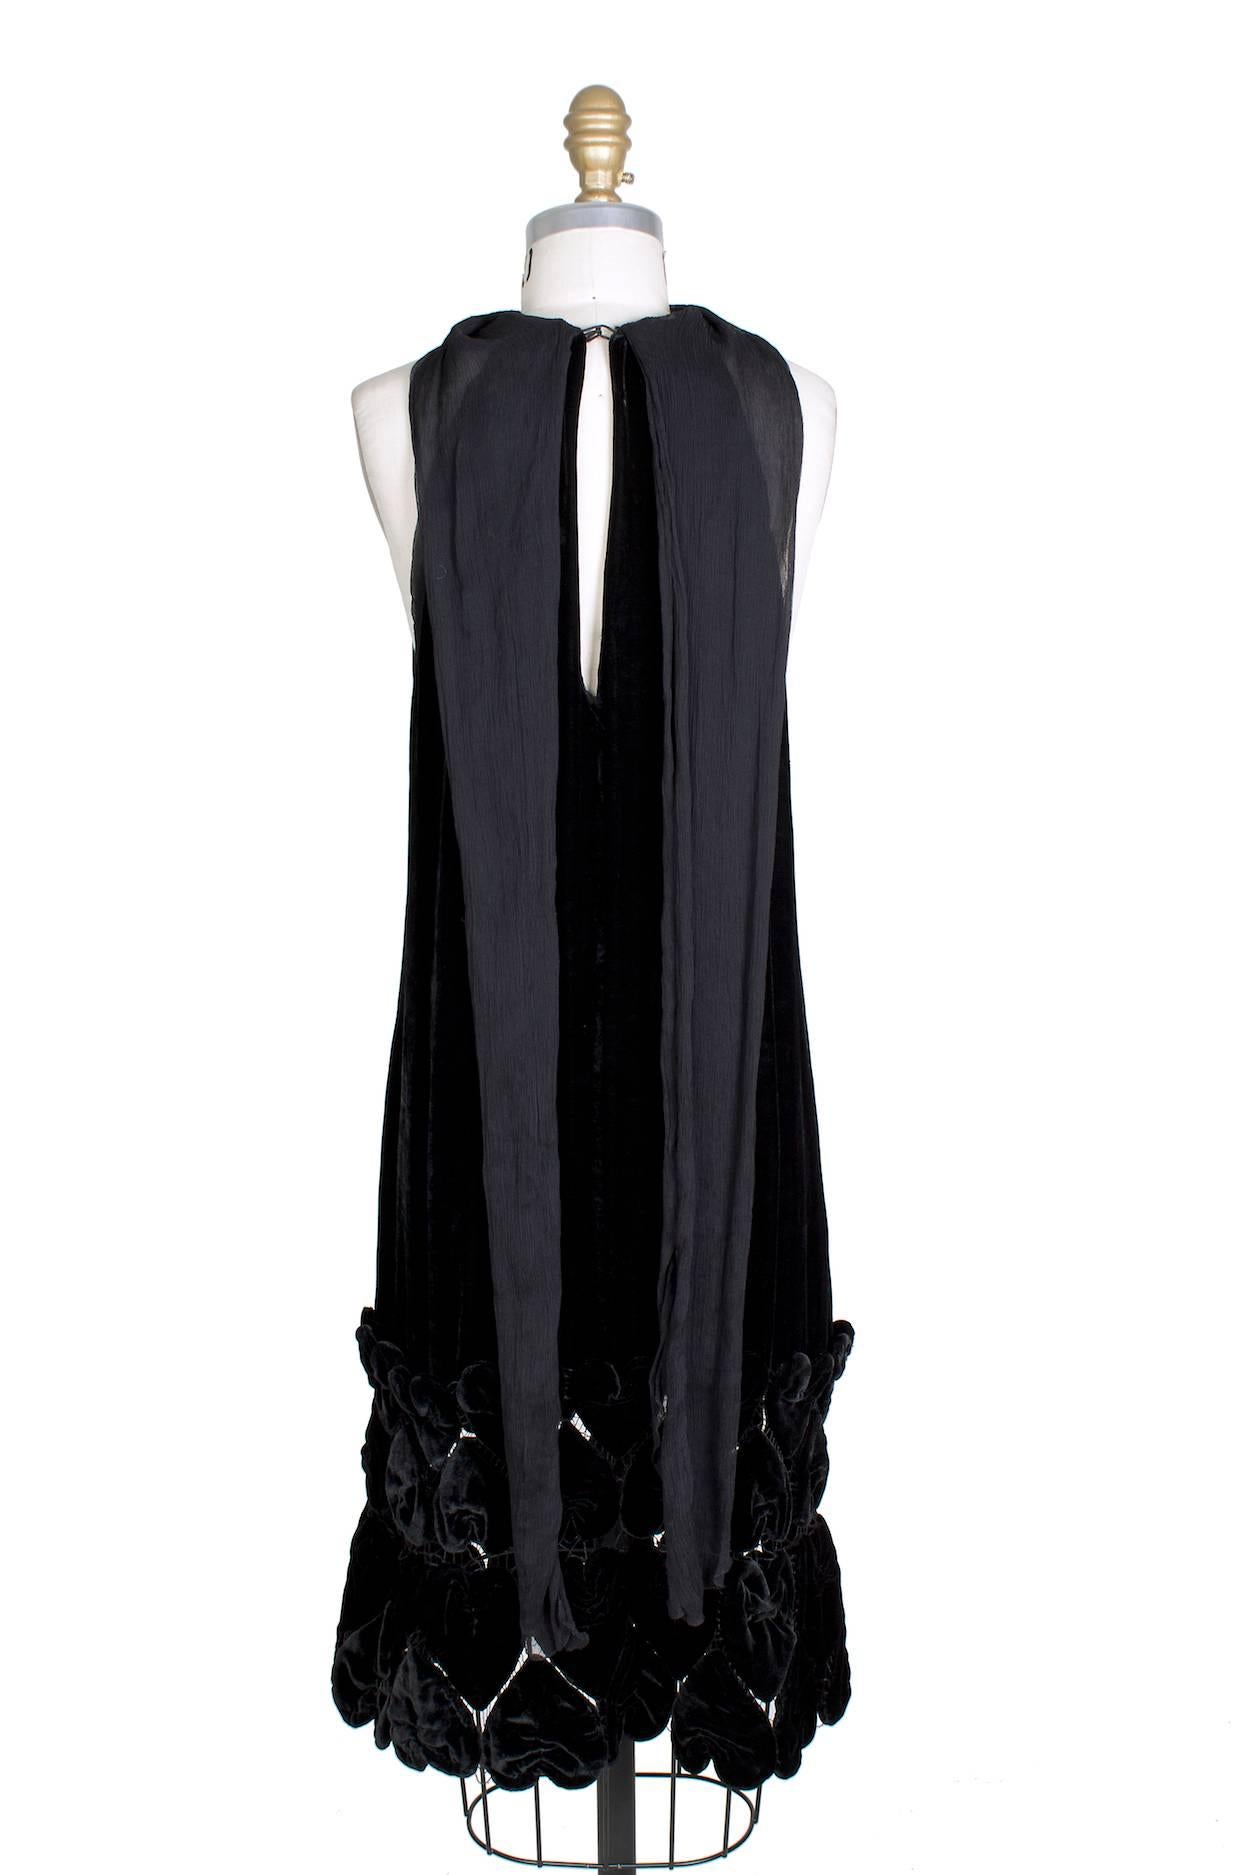 This is a velvet dress by Jean Paul Gaultier c. 1990s.  It features an attached chiffon scarf around the neck and the bottom of the skirt has loosely stitched together large velvet pieces to create transparency.  